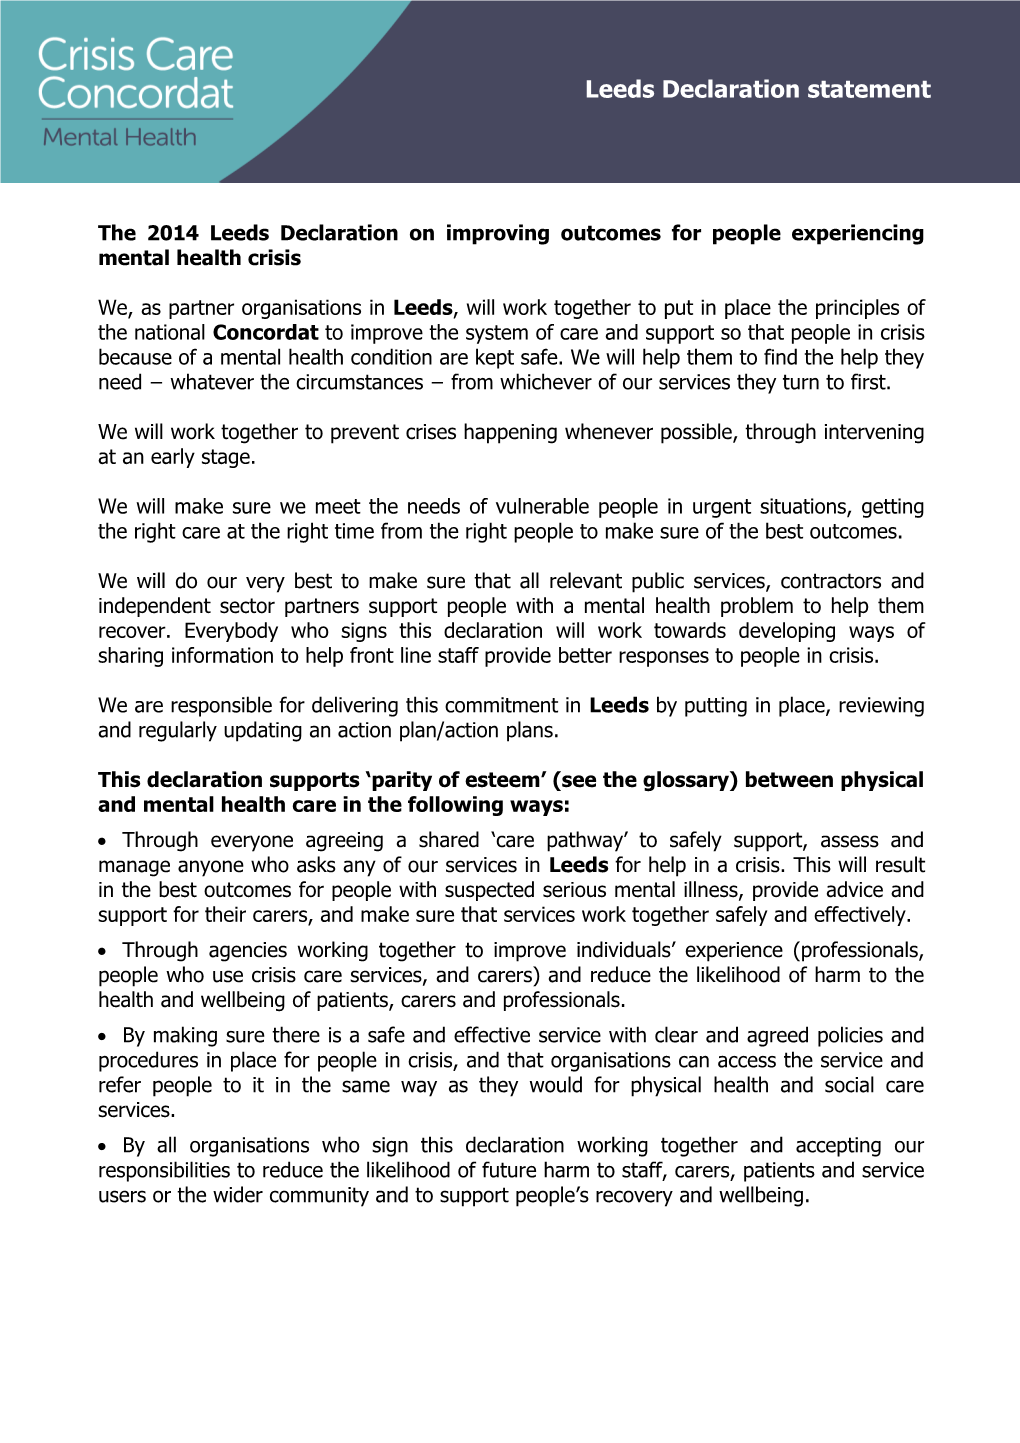 The 2014 Leeds Declaration on Improving Outcomes for People Experiencing Mental Health Crisis